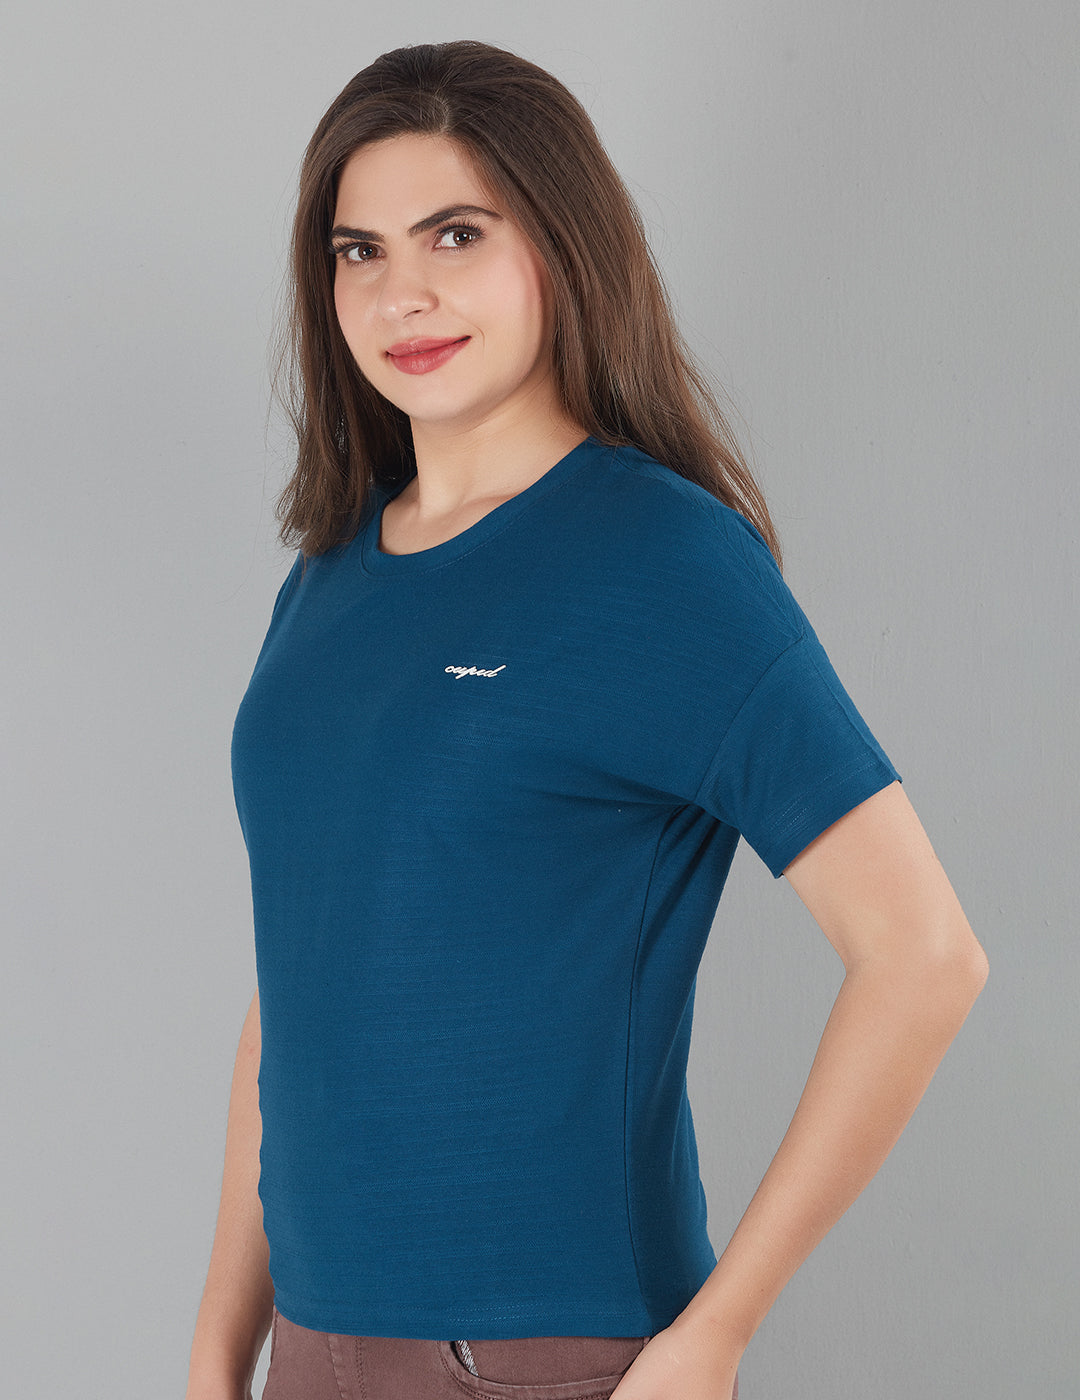 Stylish Plain Short T-Shirts for women In Teal Blue At Best Price